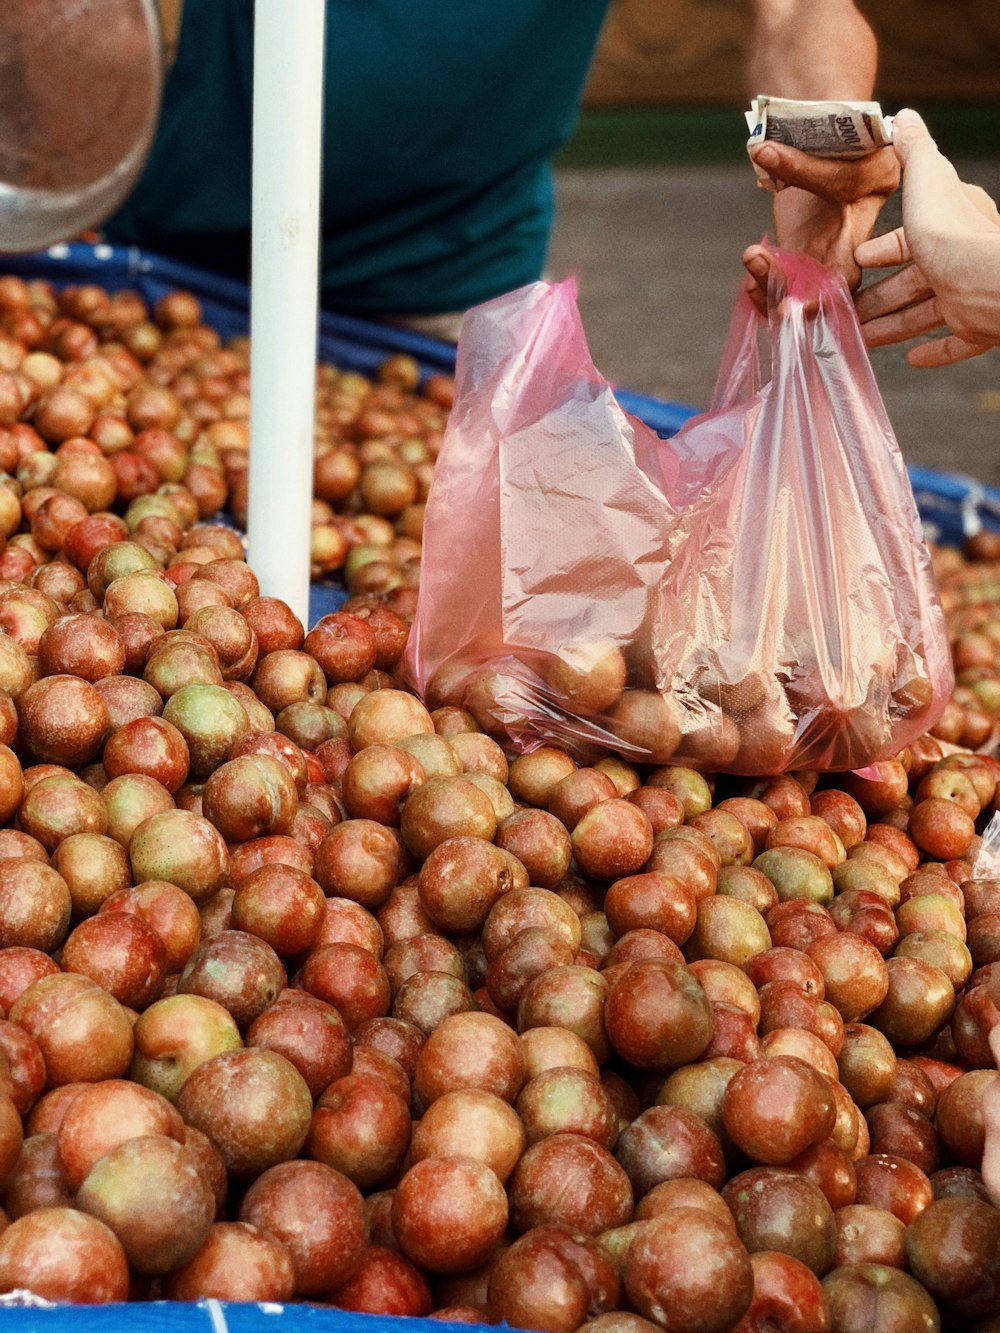 brown round fruits on plastic bags